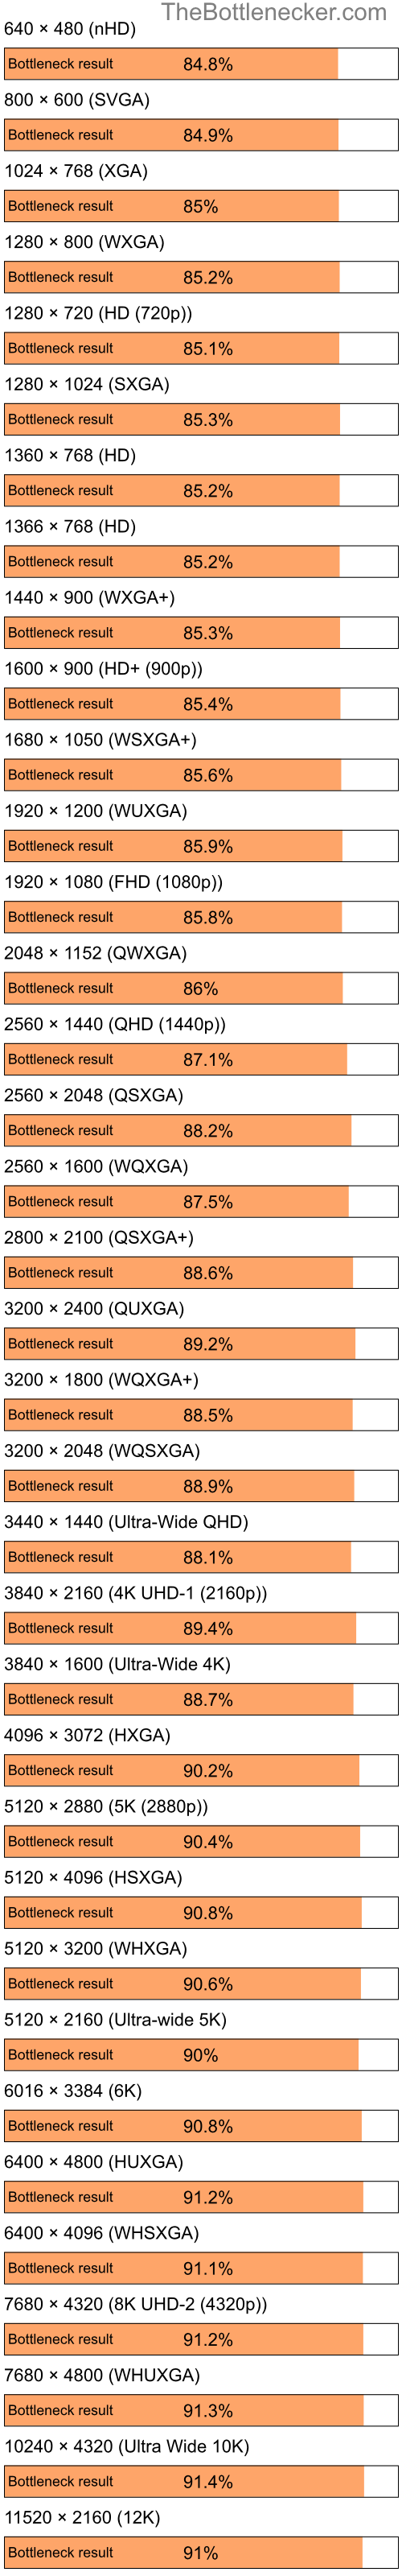 Bottleneck results by resolution for Intel Pentium 4 and NVIDIA GeForce FX 5200 in Processor Intense Tasks